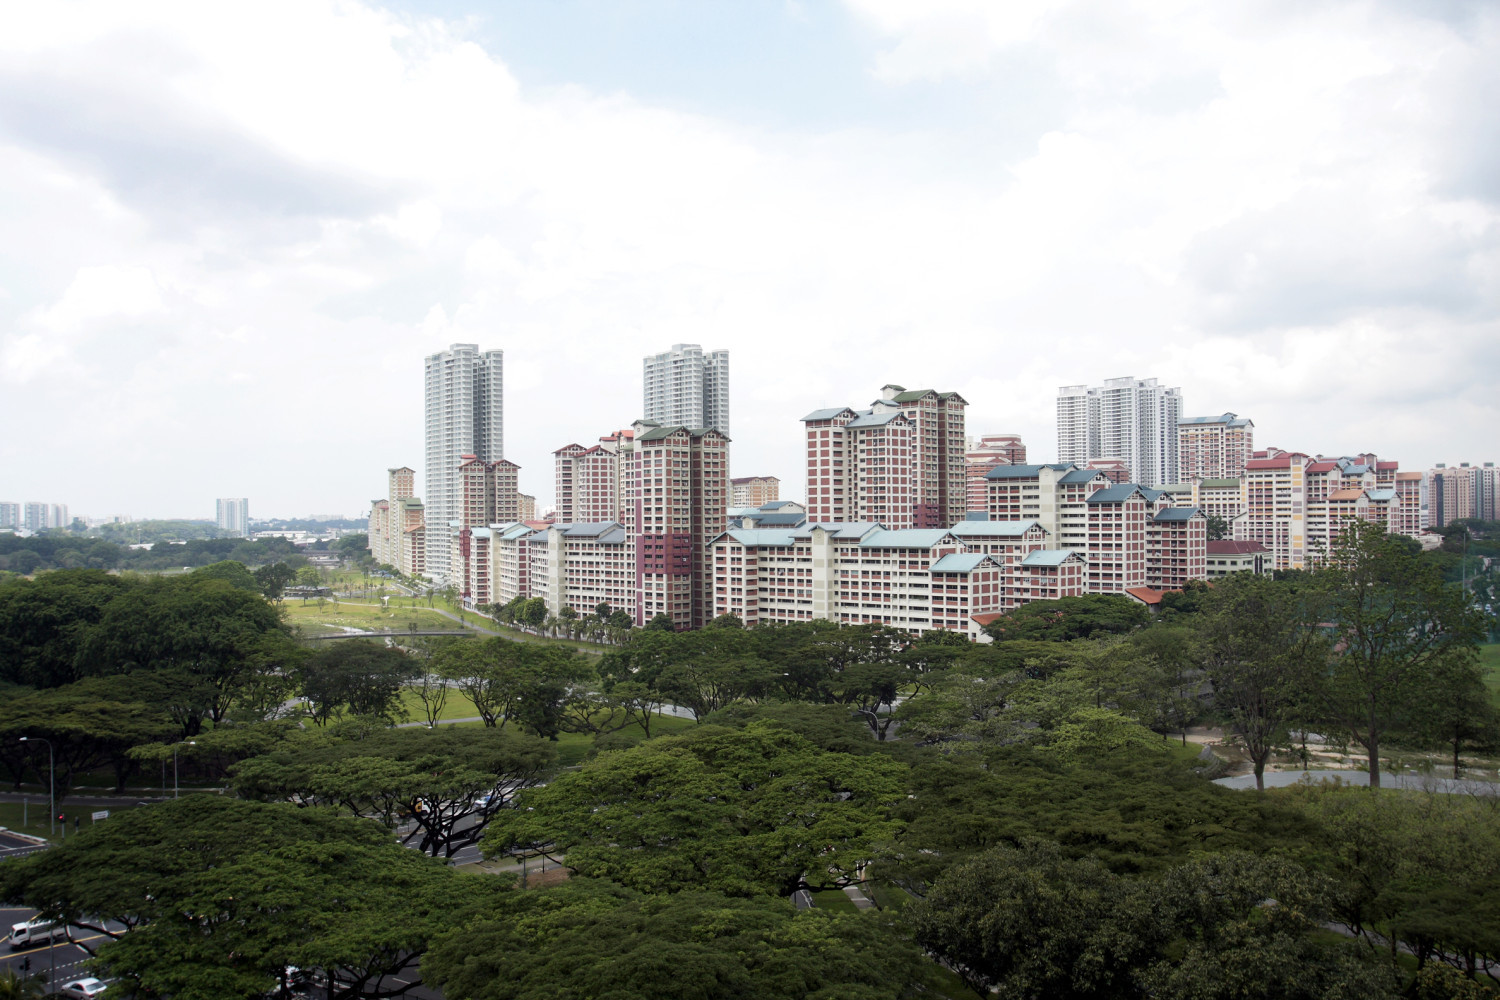 JUST SOLD: Bishan DBSS flat sold for $960,000 - Property News